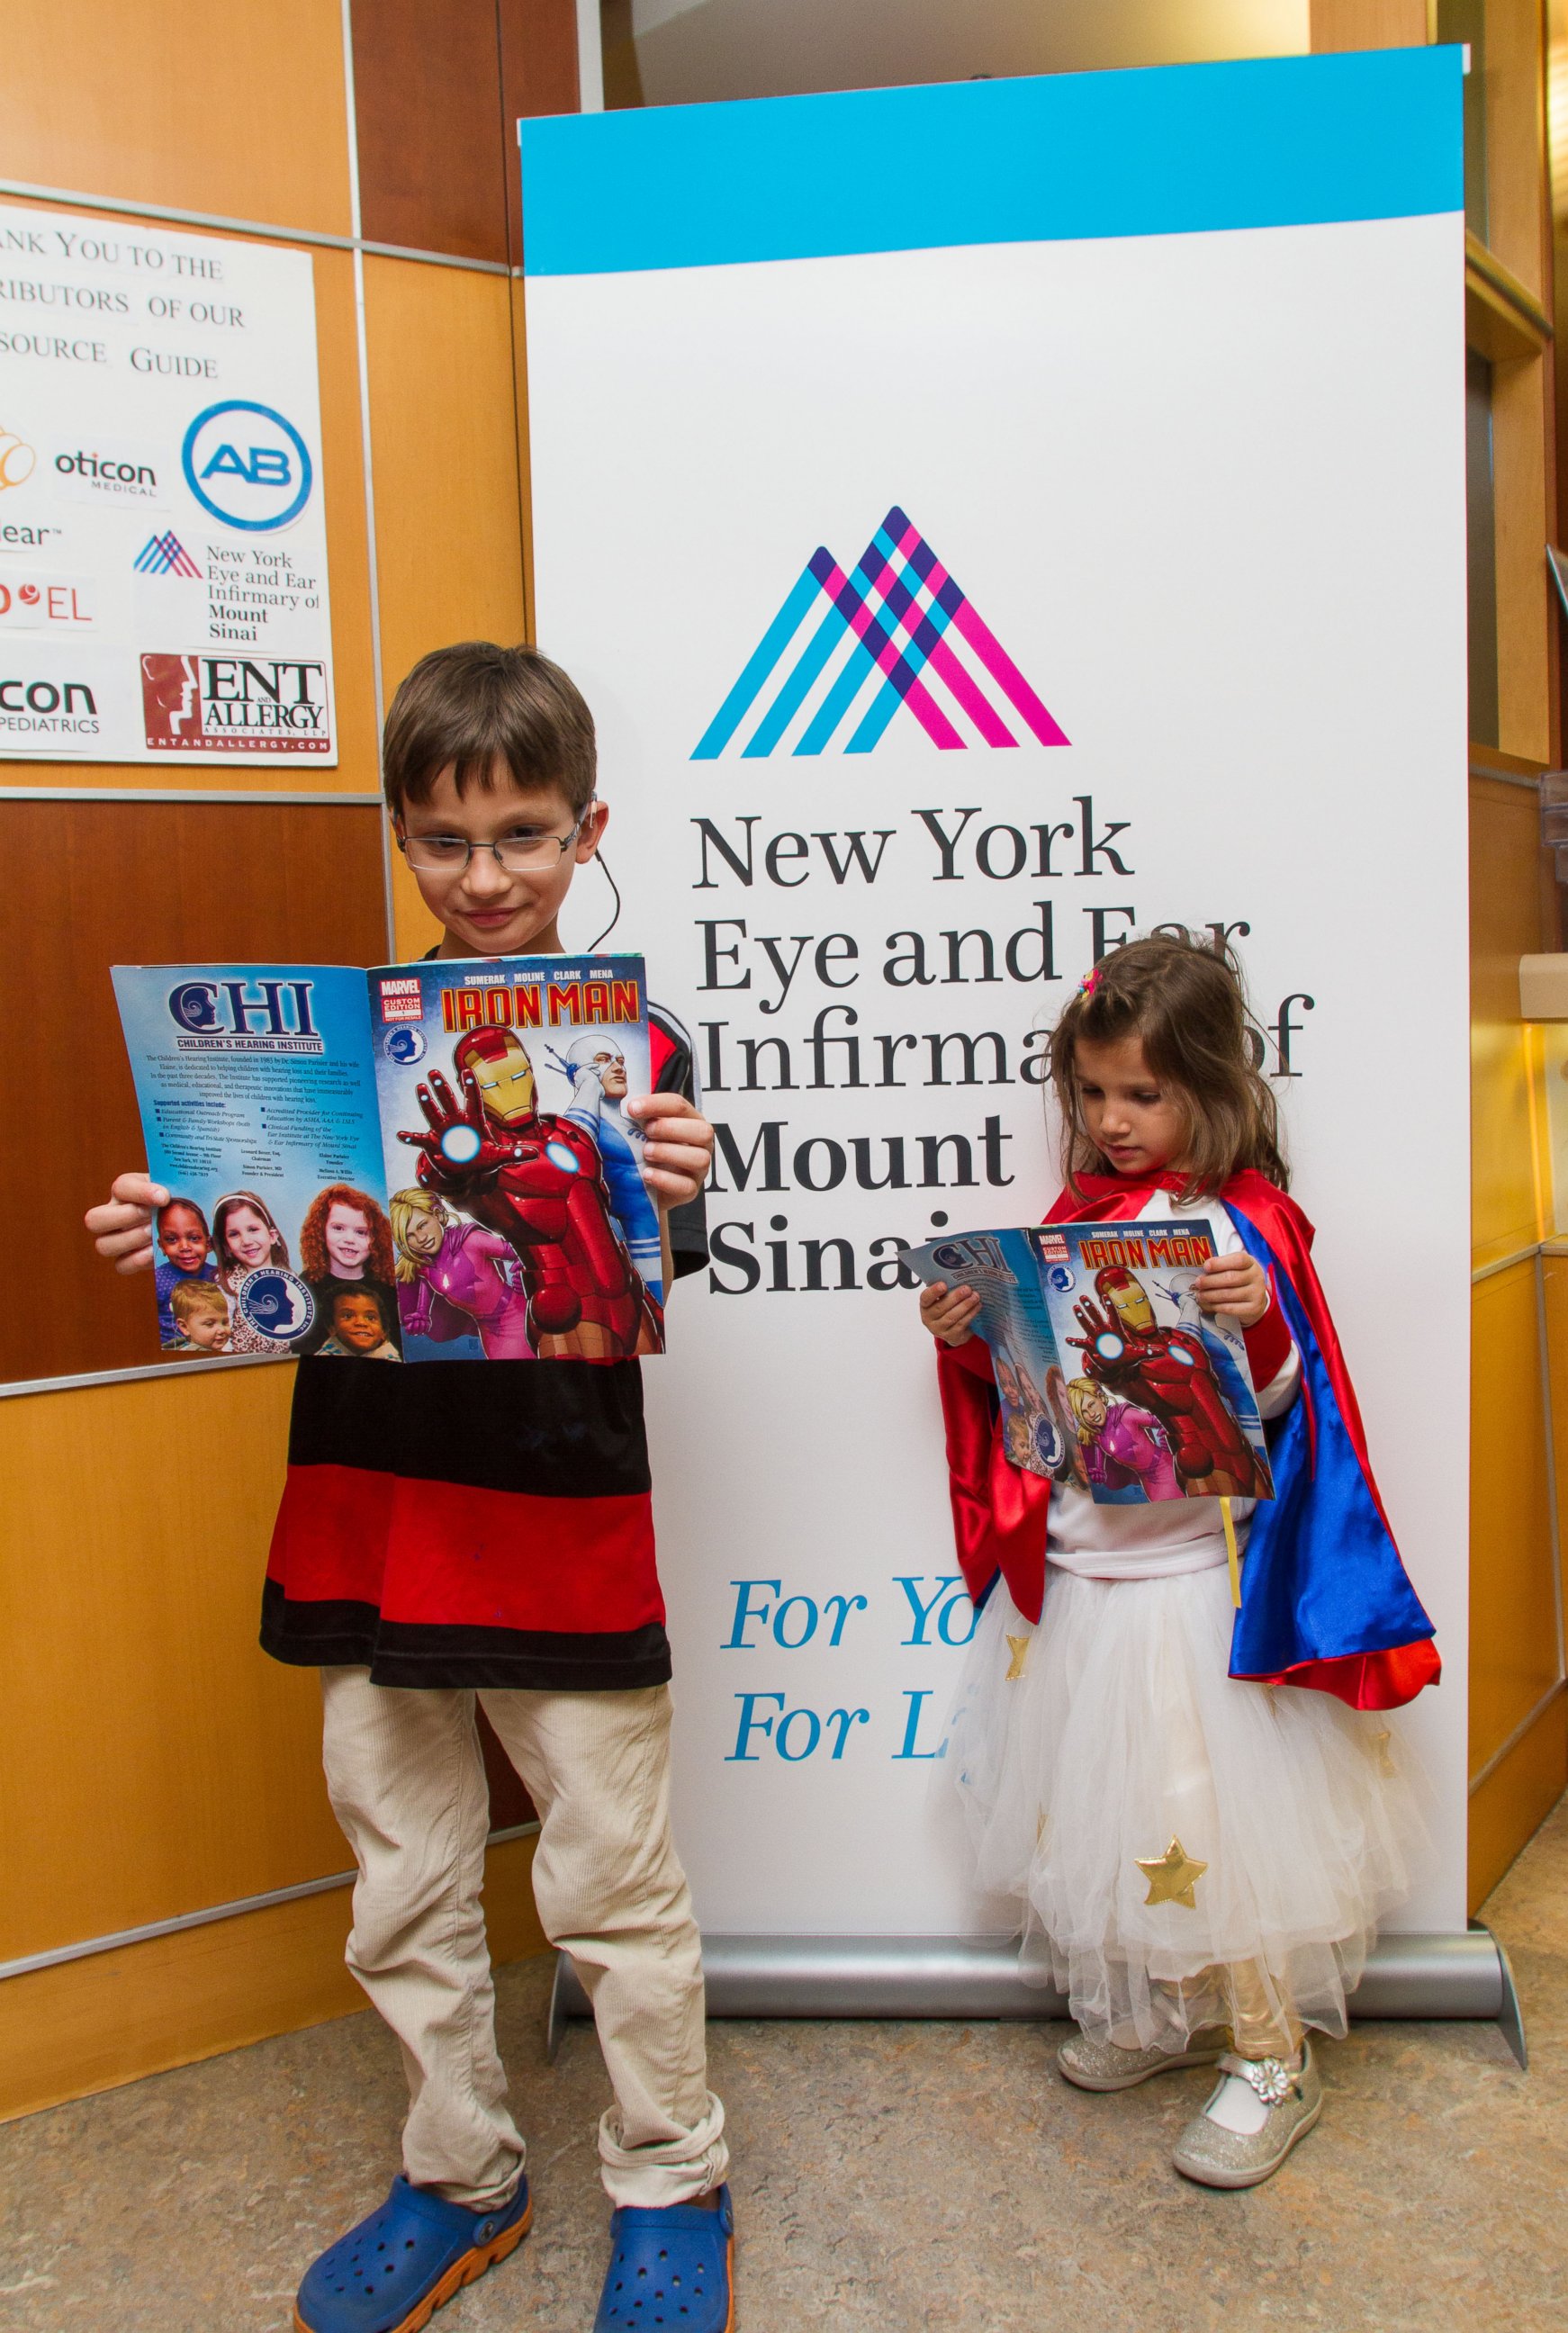 PHOTO: The New York Eye and Ear Infirmary of Mount Sinai hosted an event where kids got to see a new comic book aimed at the hearing-impaired which was created by Children's Hearing Institute and Marvel Custom Solutions.